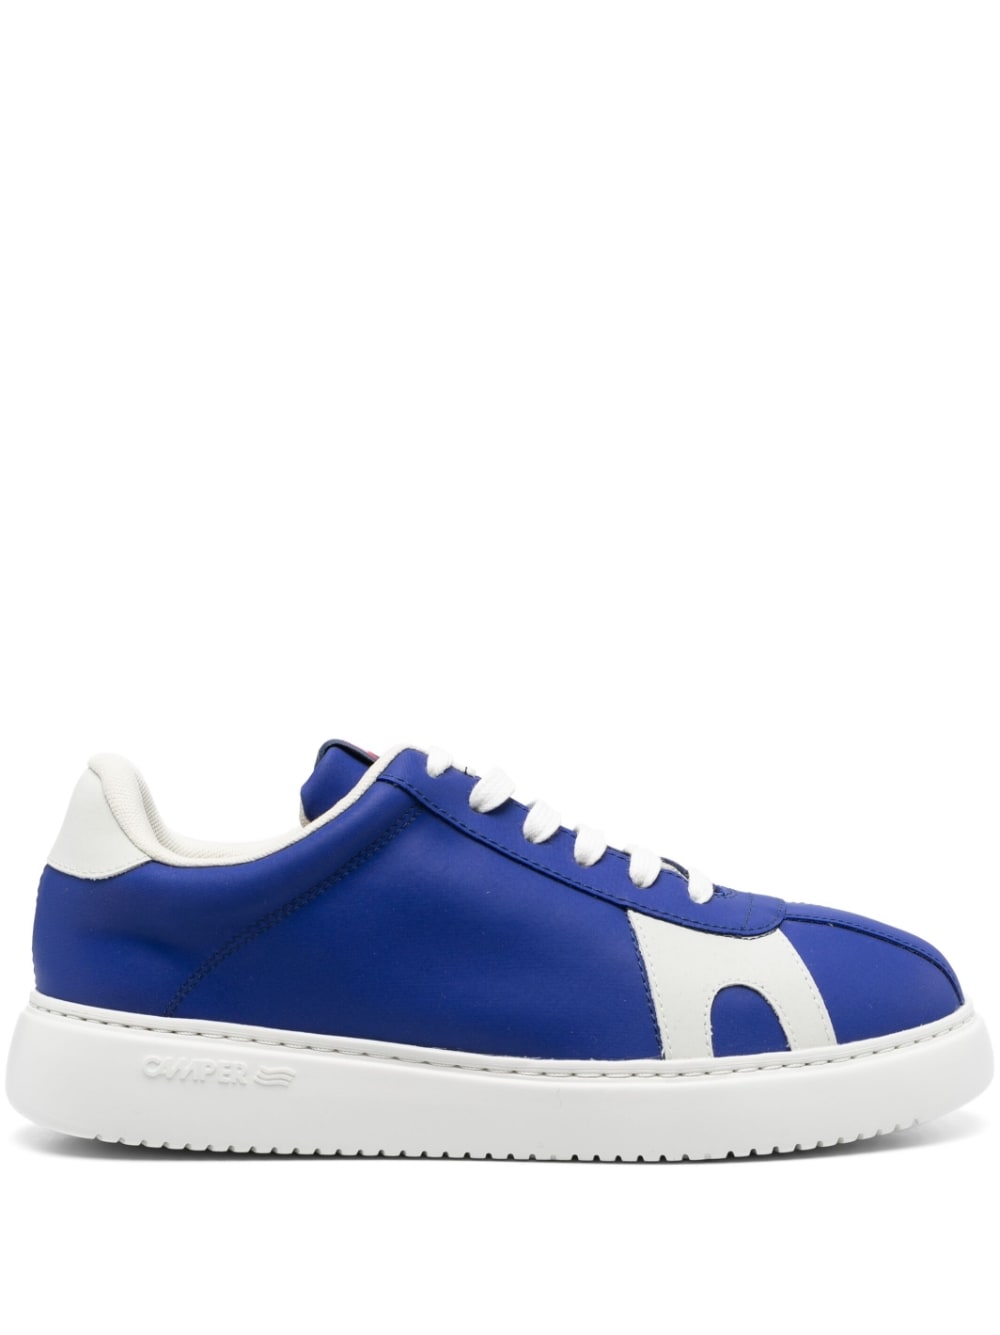 Camper - low-top lace-up sneakers - men - MIRUM/Bamboo/Recycled Polyester/Polyethylene vinyl acetate (PEVA) - 42 - Blue